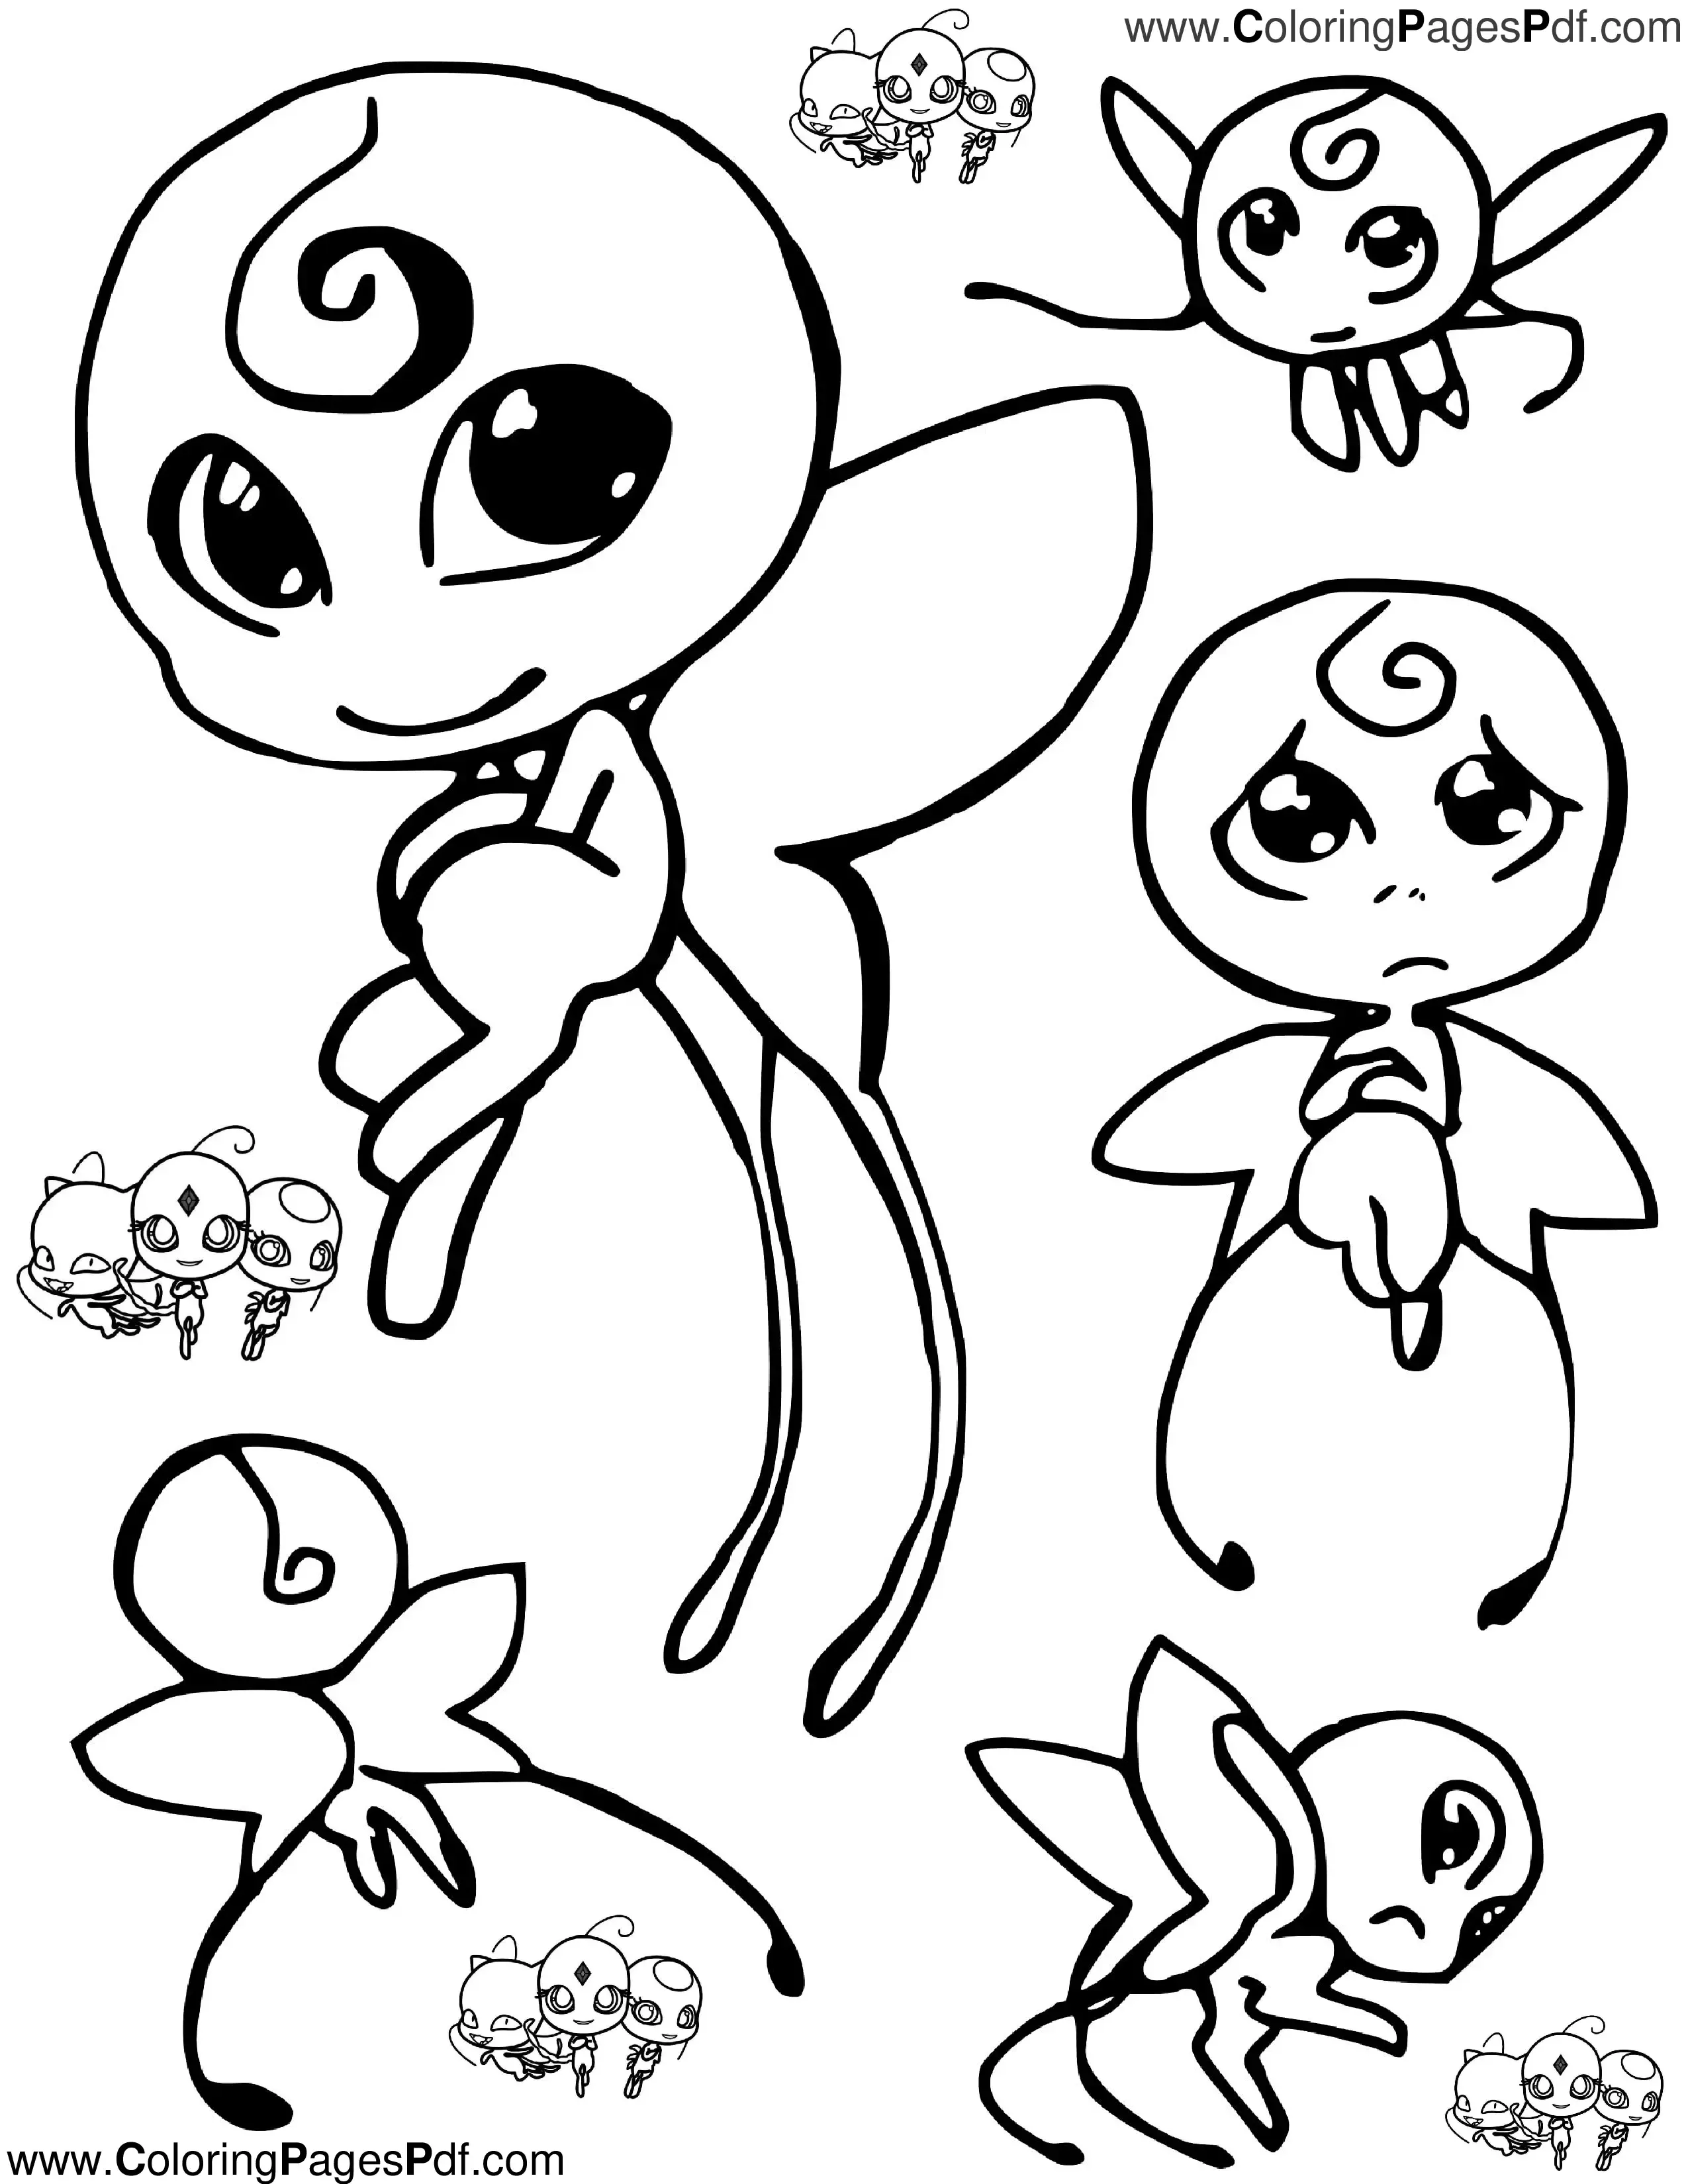 Miraculous ladybug coloring pages all kwamis